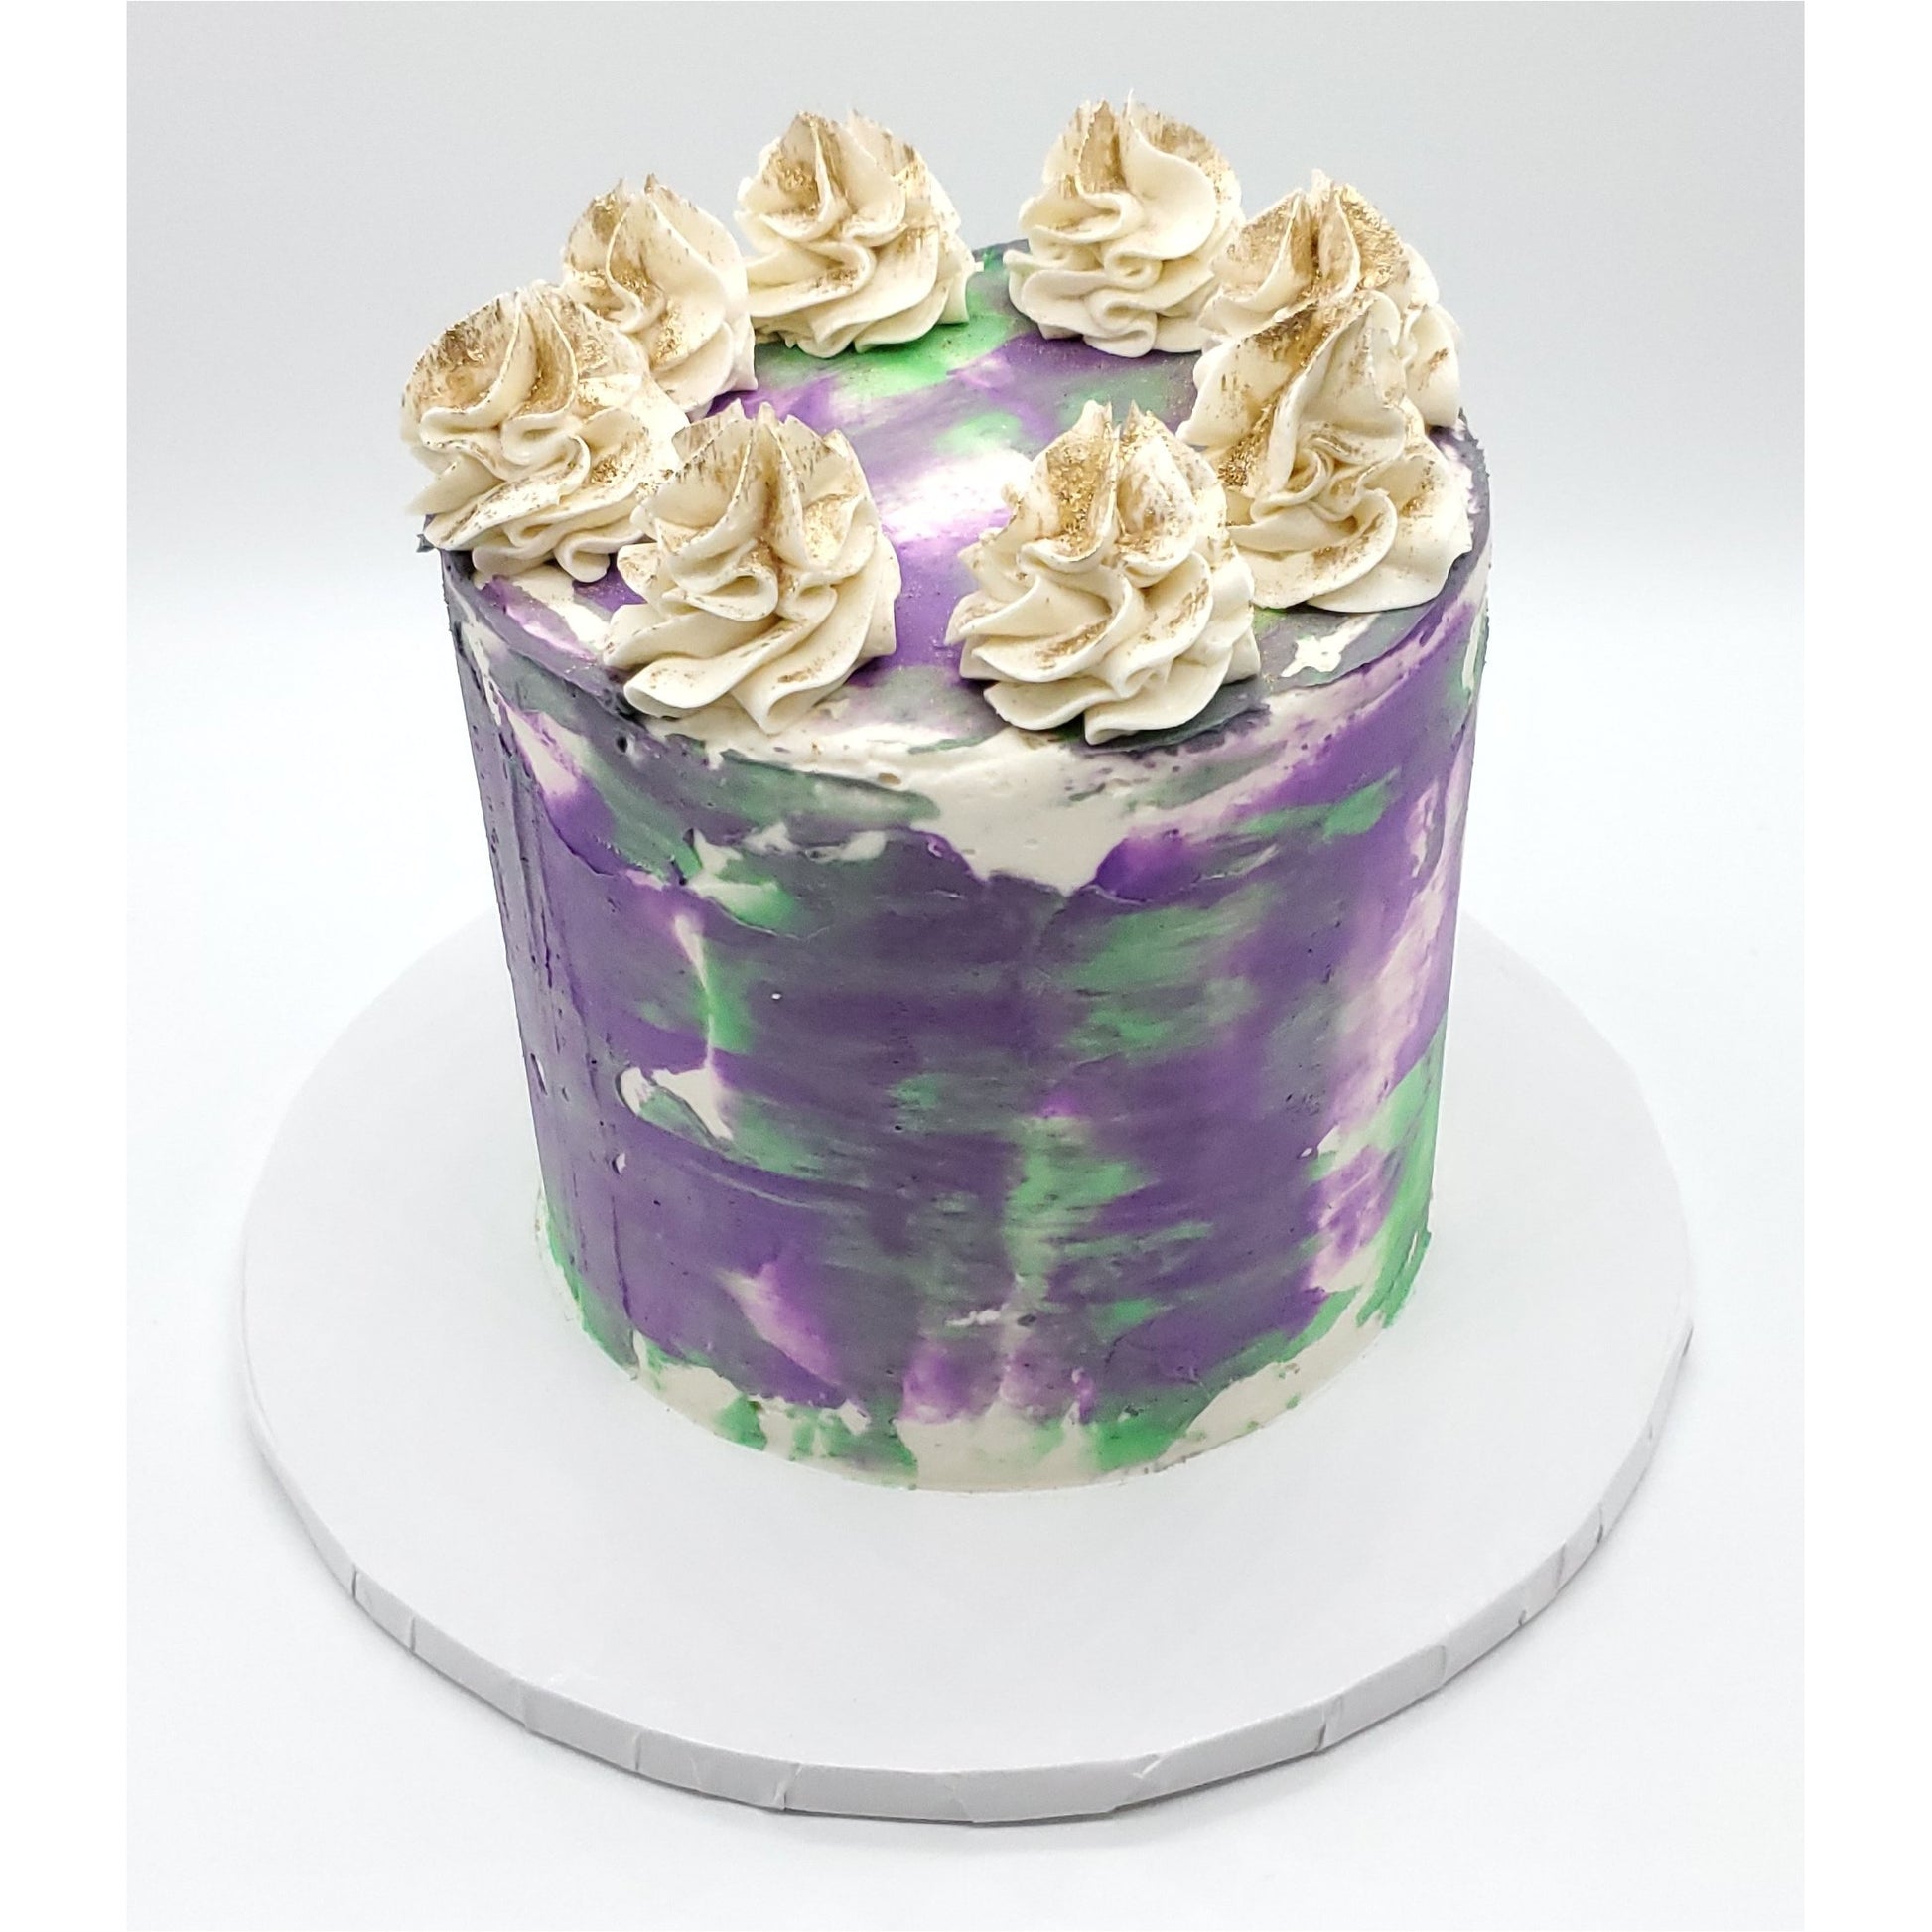 6 Inch Purple and Green Tōn'd Cake